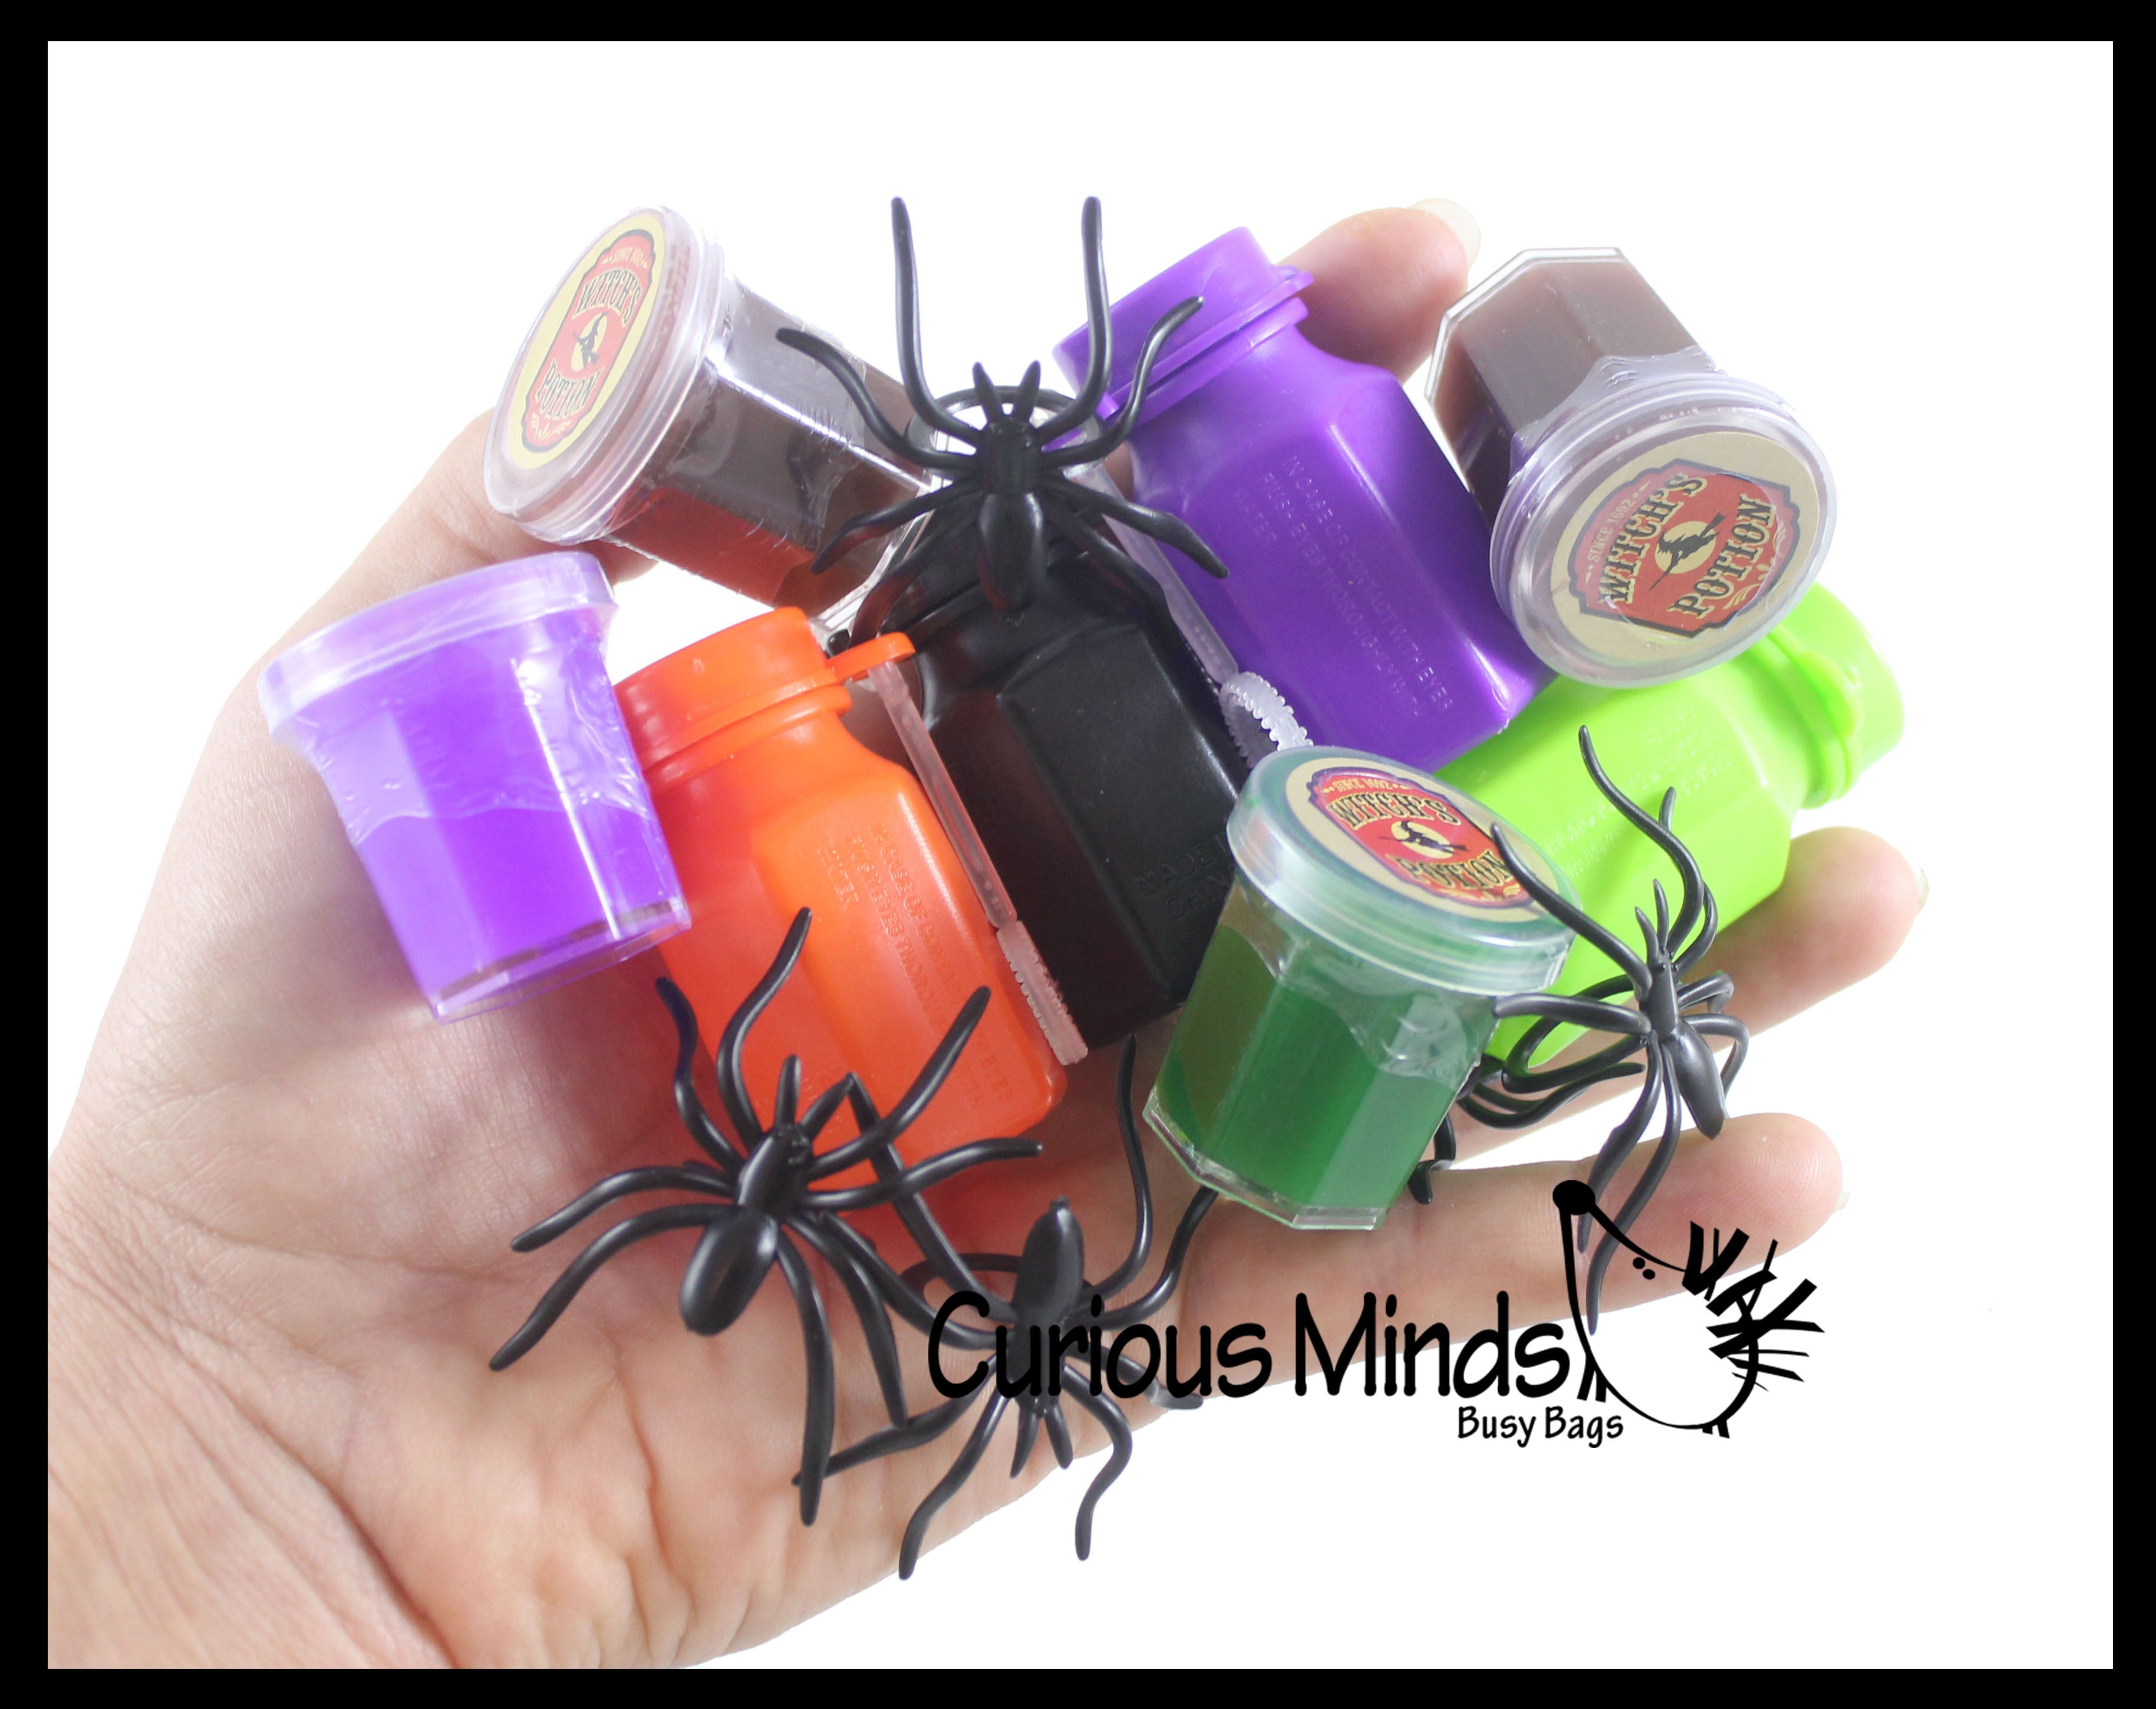 Halloween 240 Piece Small Toy Set - Mini Bubbles, Witches Potion Putty, and Spider Rings - Trick or Treat (20 Dozen)